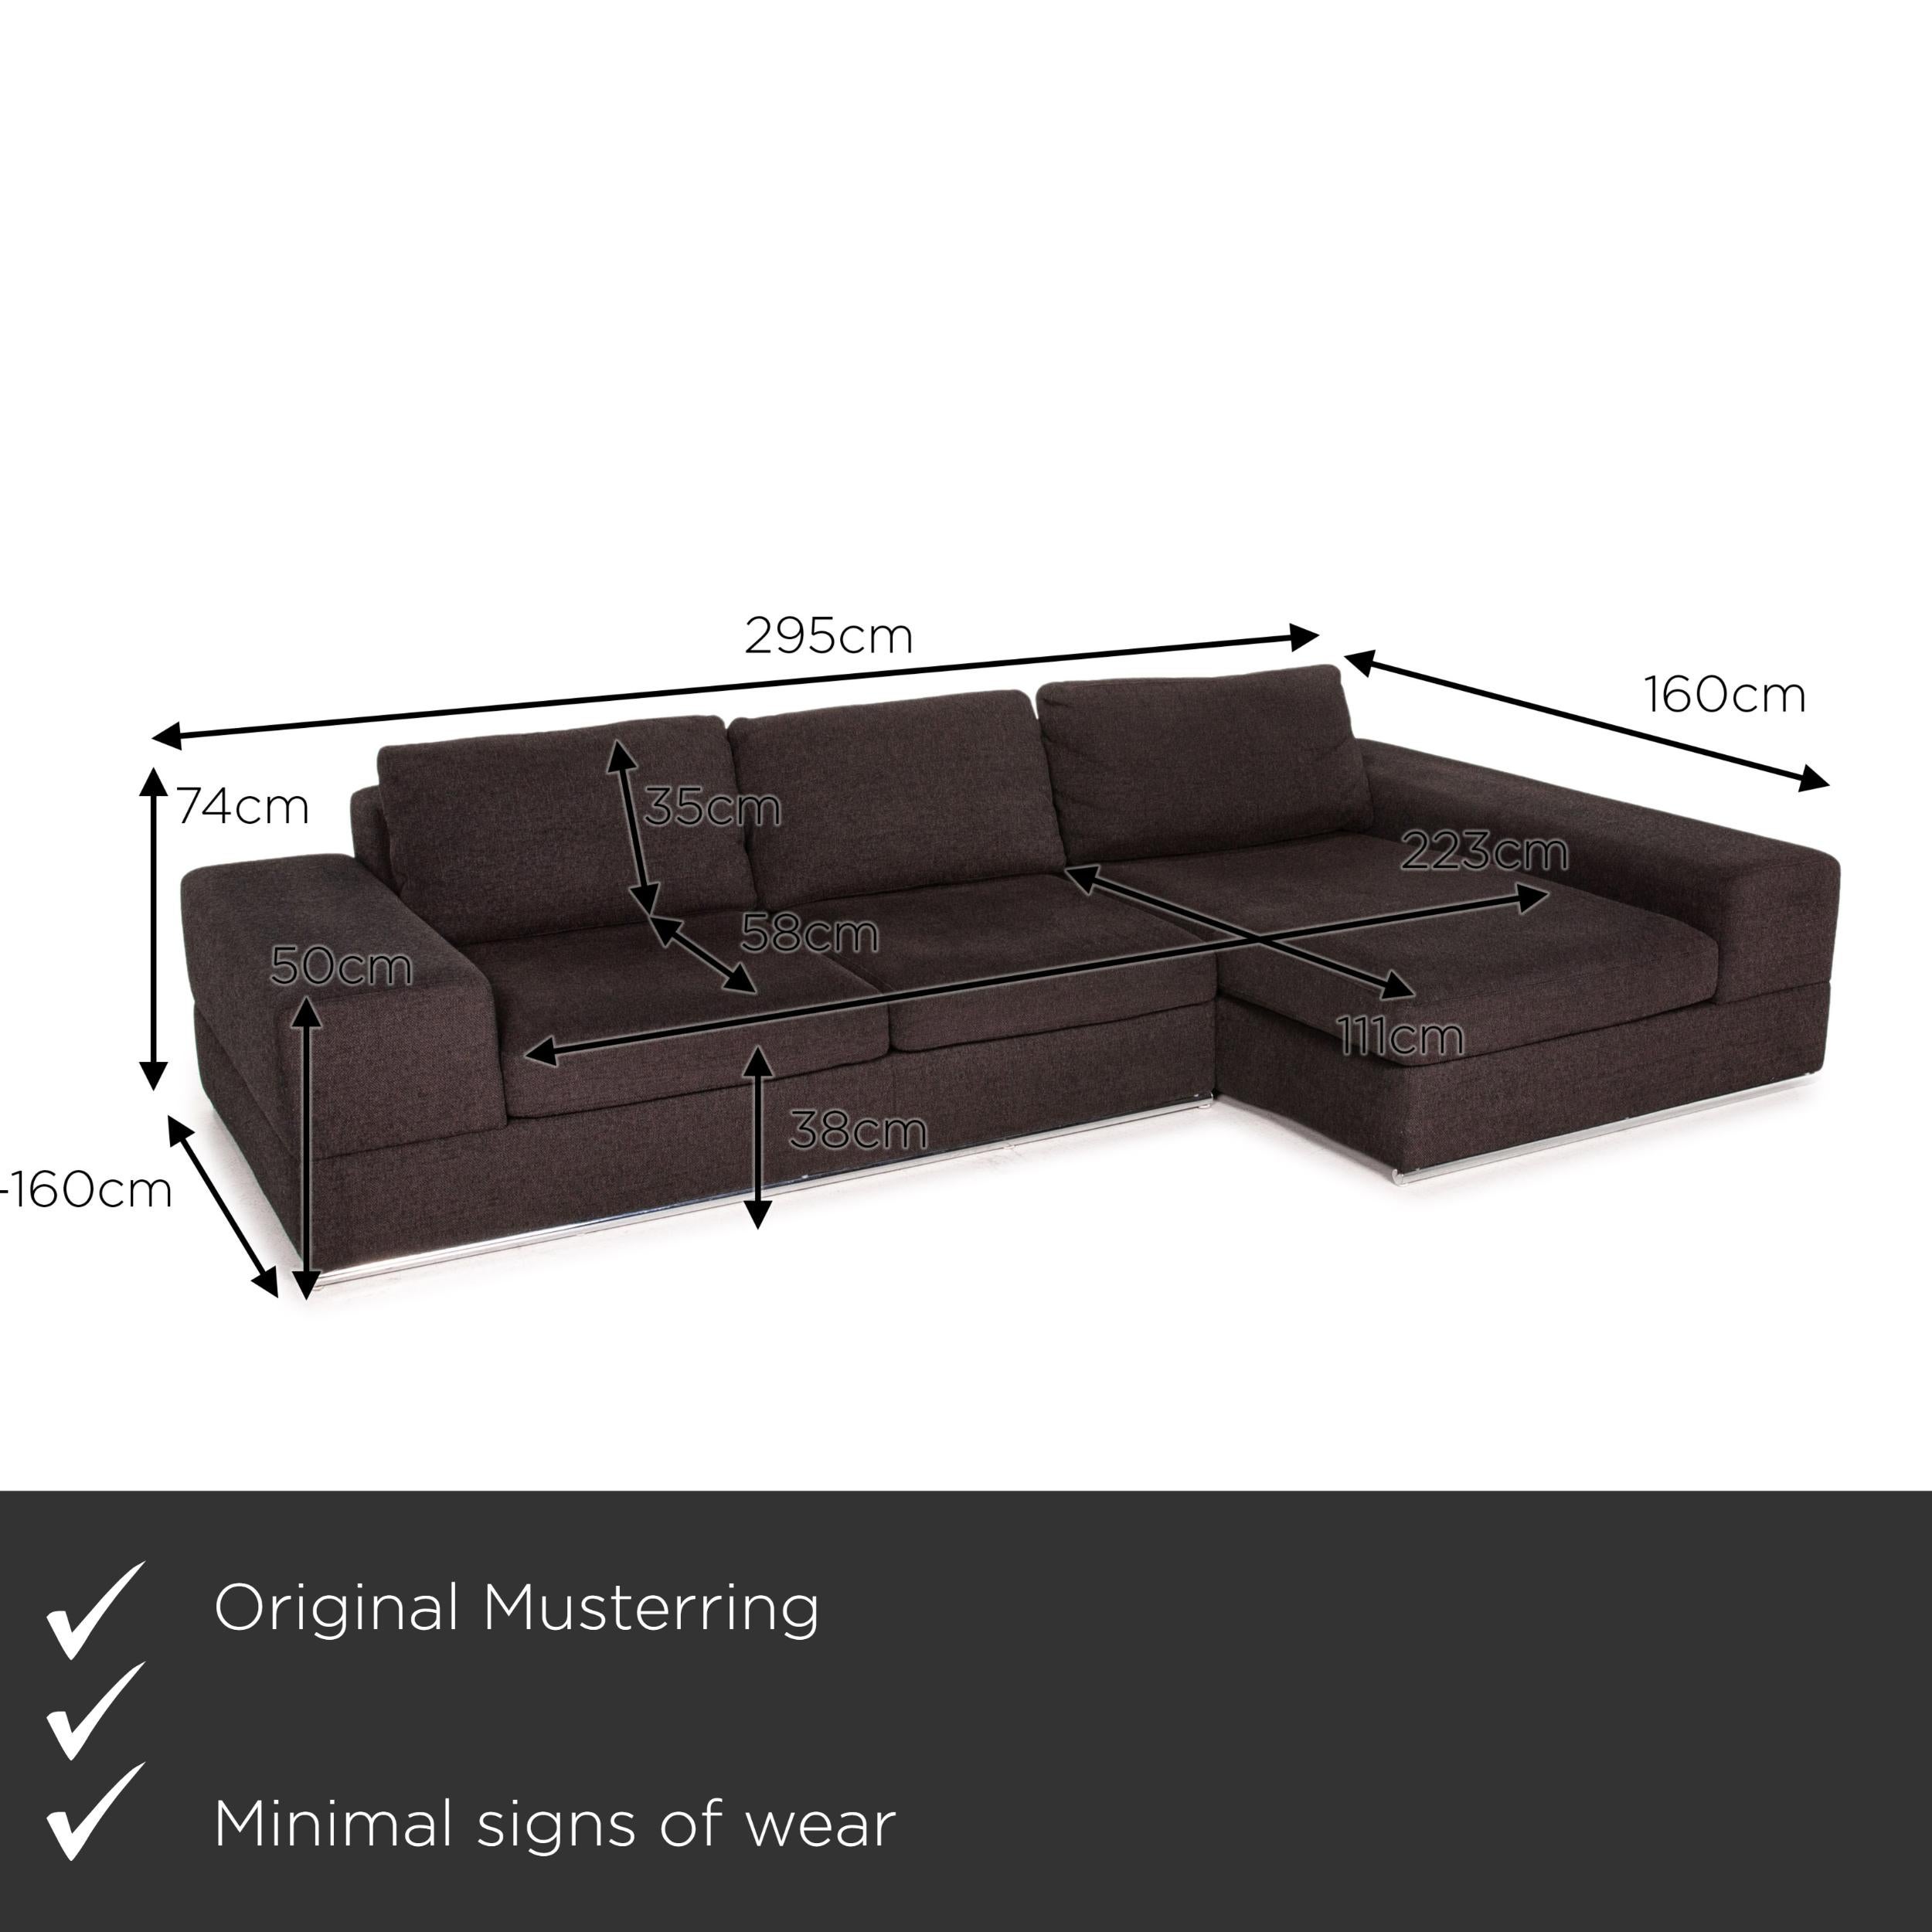 We present to you a Musterring fabric corner sofa brown dark brown couch.


 Product measurements in centimeters:
 

Depth: 108
Width: 295
Height: 74
Seat height: 38
Rest height: 50
Seat depth: 58
Seat width: 223
Back height: 35.
 